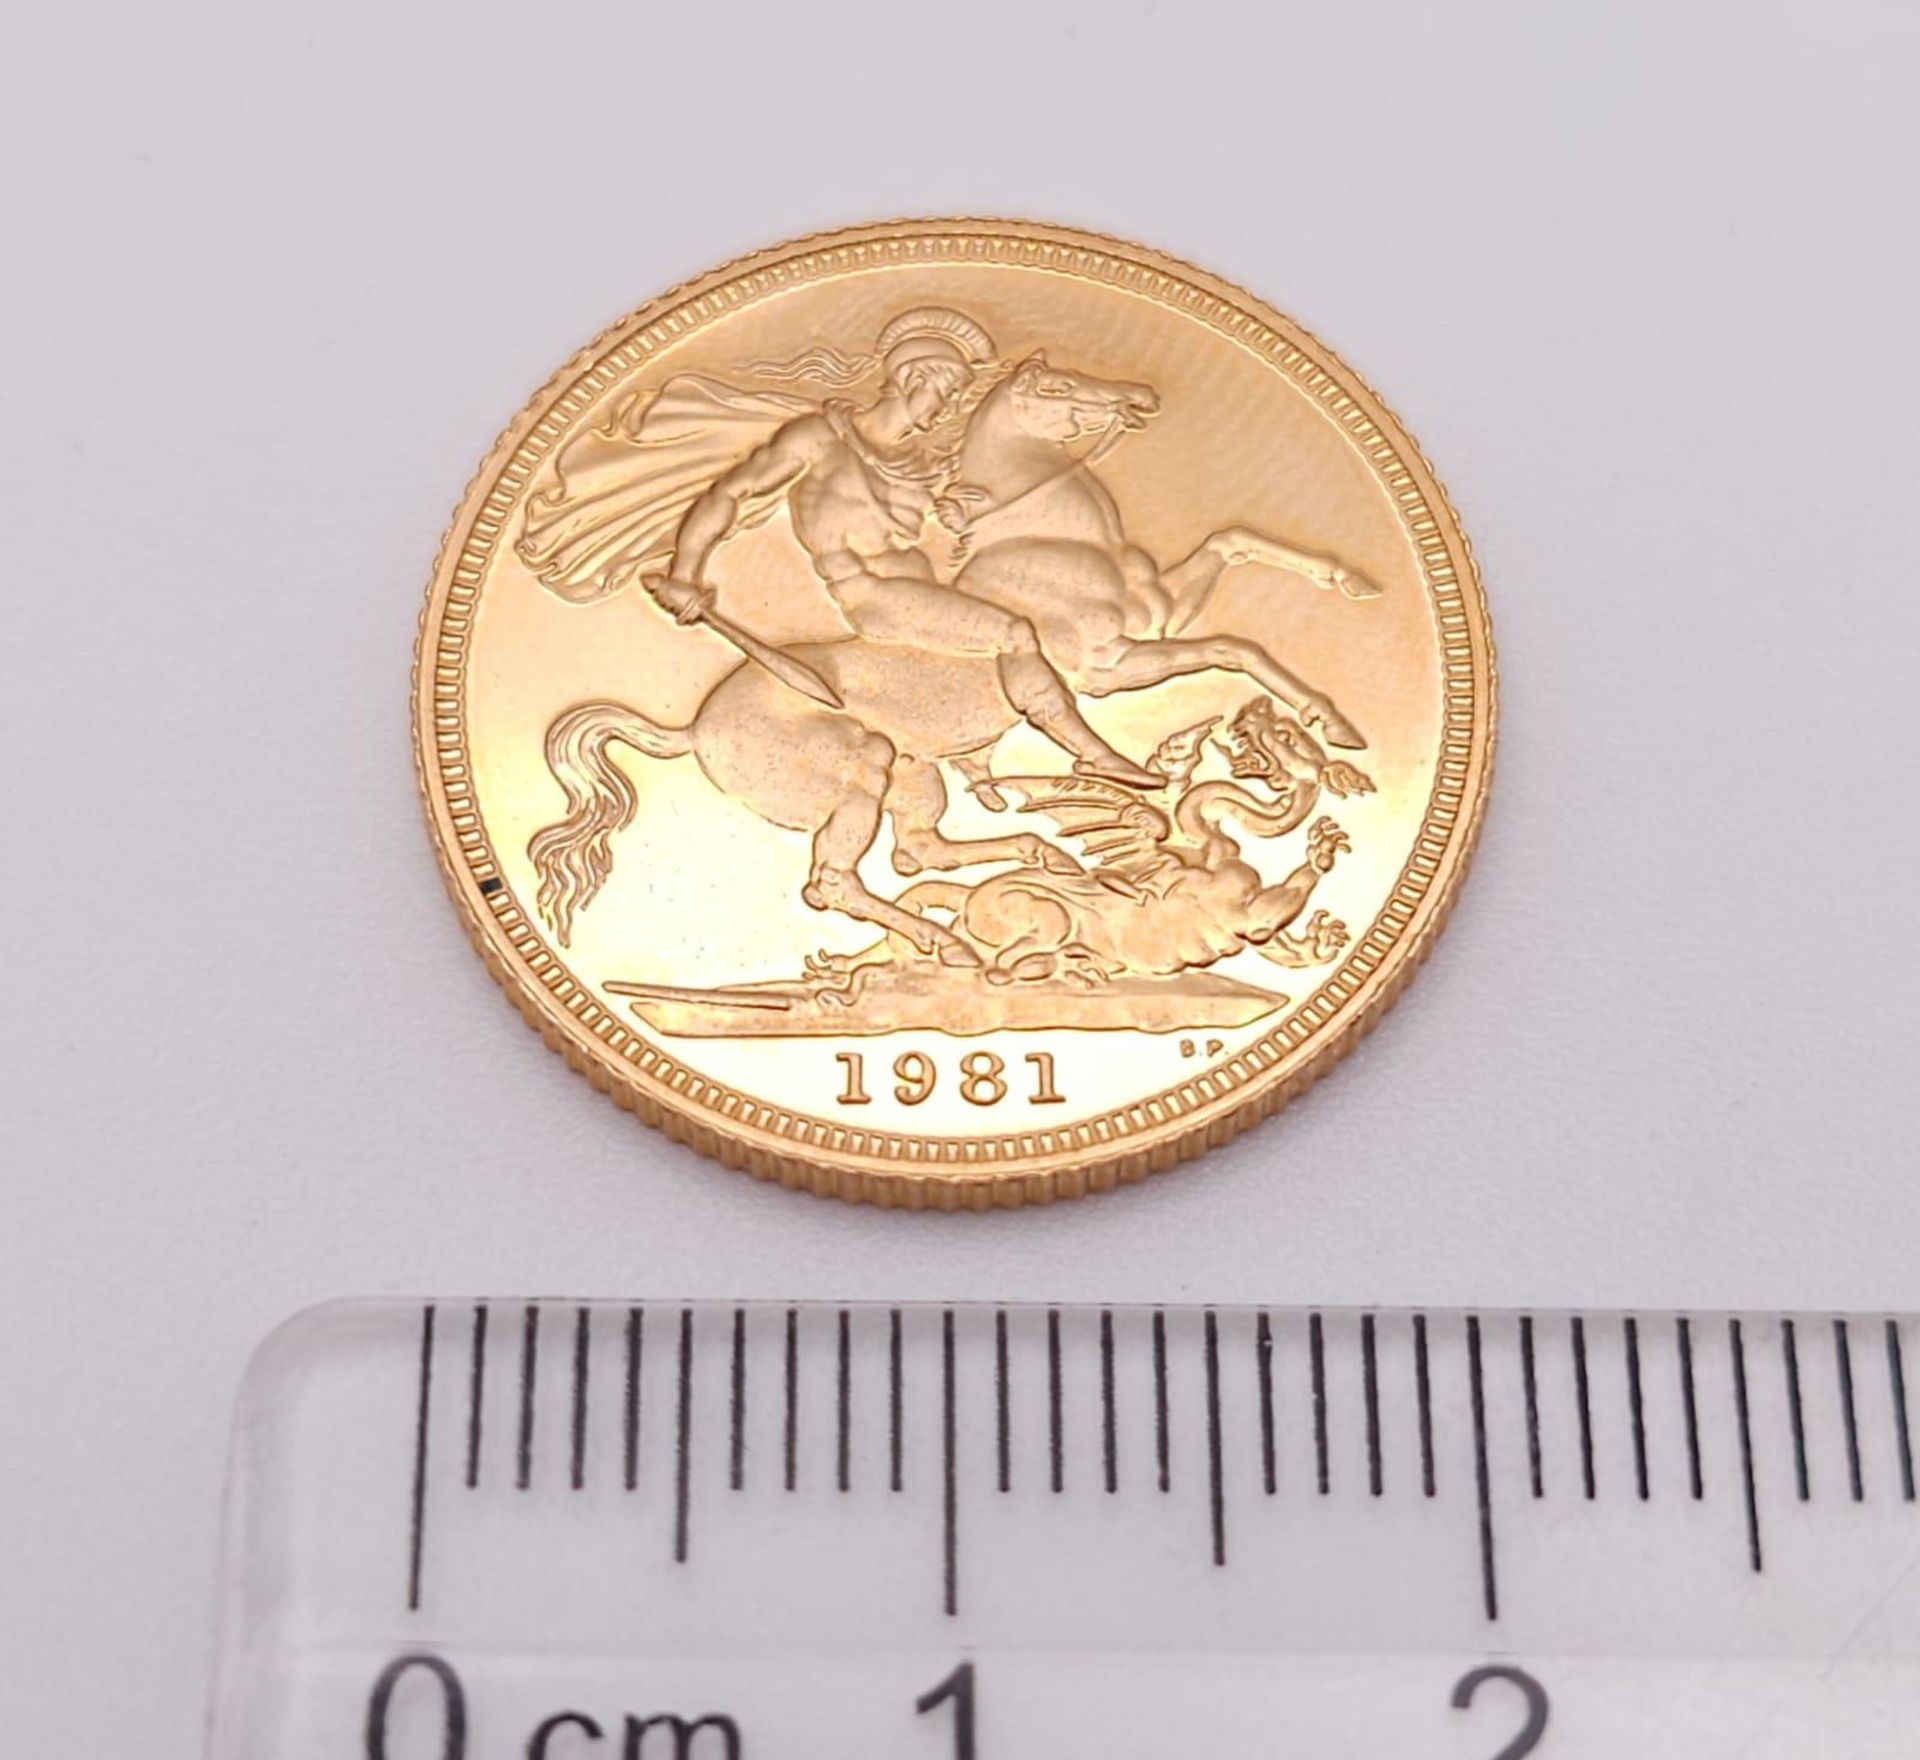 A 22K GOLD SOVEREIGN DATED 1981 IN CAPSULE AS NEW. - Image 5 of 5